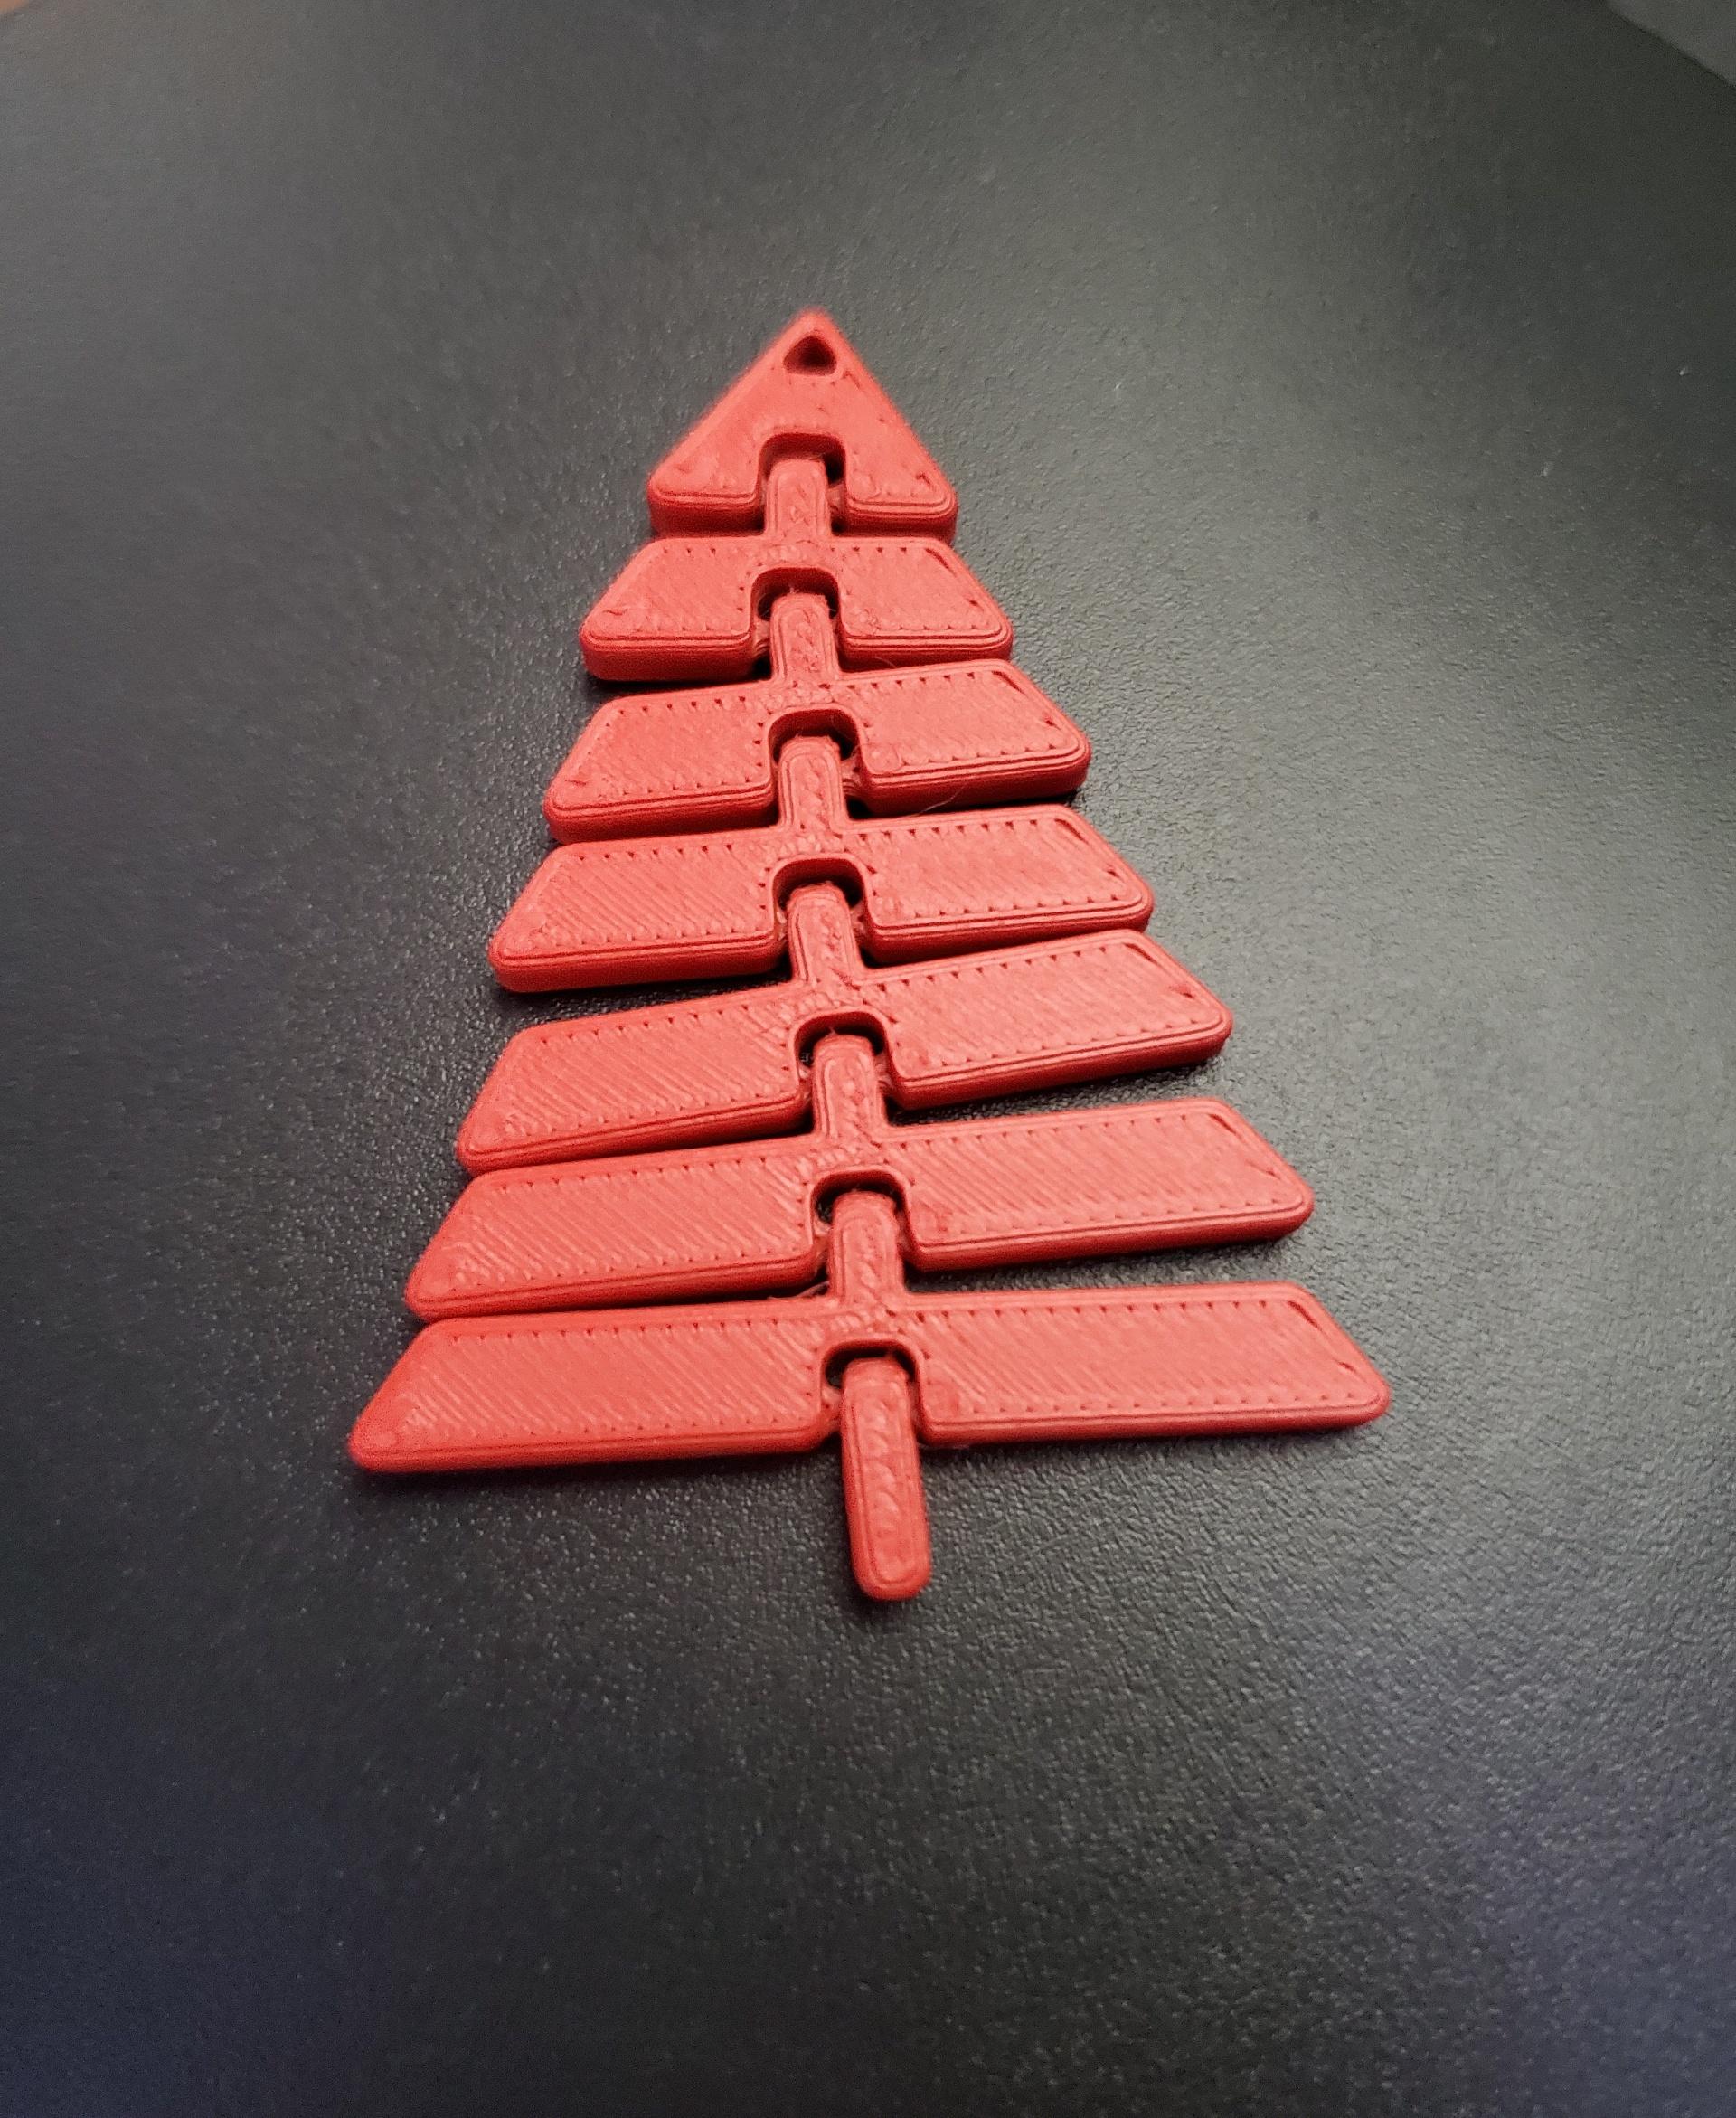 Articulated Christmas Tree Keychain - Print in place fidget toy - polyterra army red - 3d model